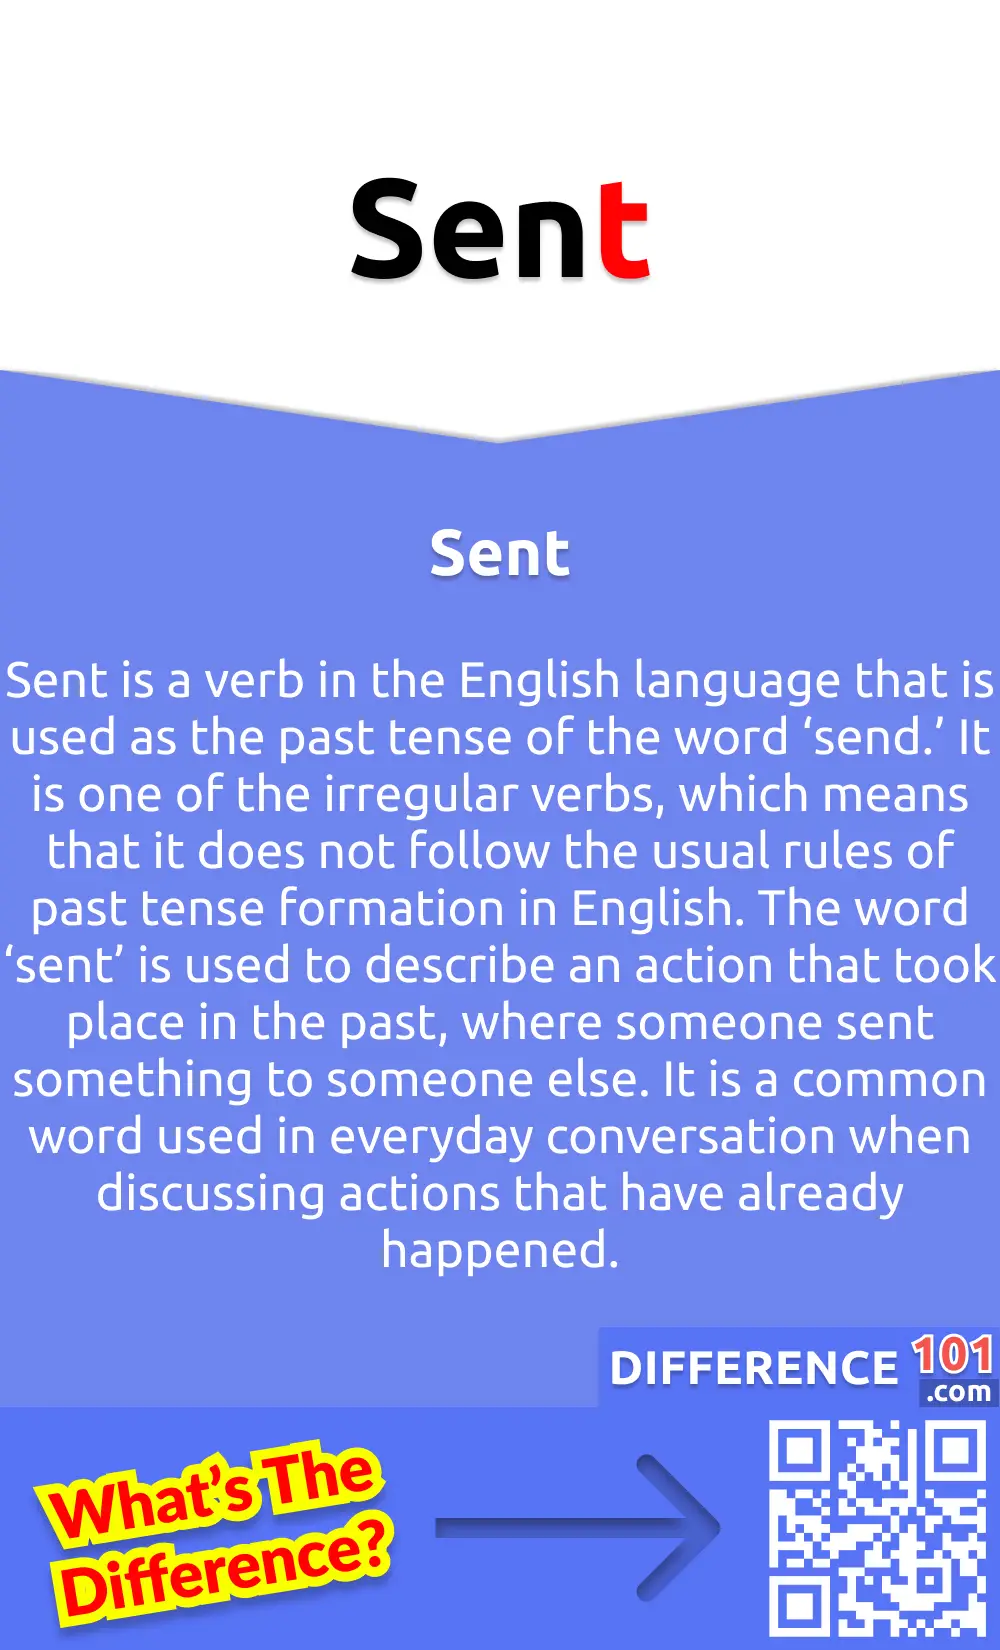 What Is Sent? Sent is a verb in the English language that is used as the past tense of the word ‘send.’ It is one of the irregular verbs, which means that it does not follow the usual rules of past tense formation in English. The word ‘sent’ is used to describe an action that took place in the past, where someone sent something to someone else. It is a common word used in everyday conversation when discussing actions that have already happened. To use the word ‘sent’ correctly, one must ensure that the verb is in the past tense and agrees with the subject of the sentence.
